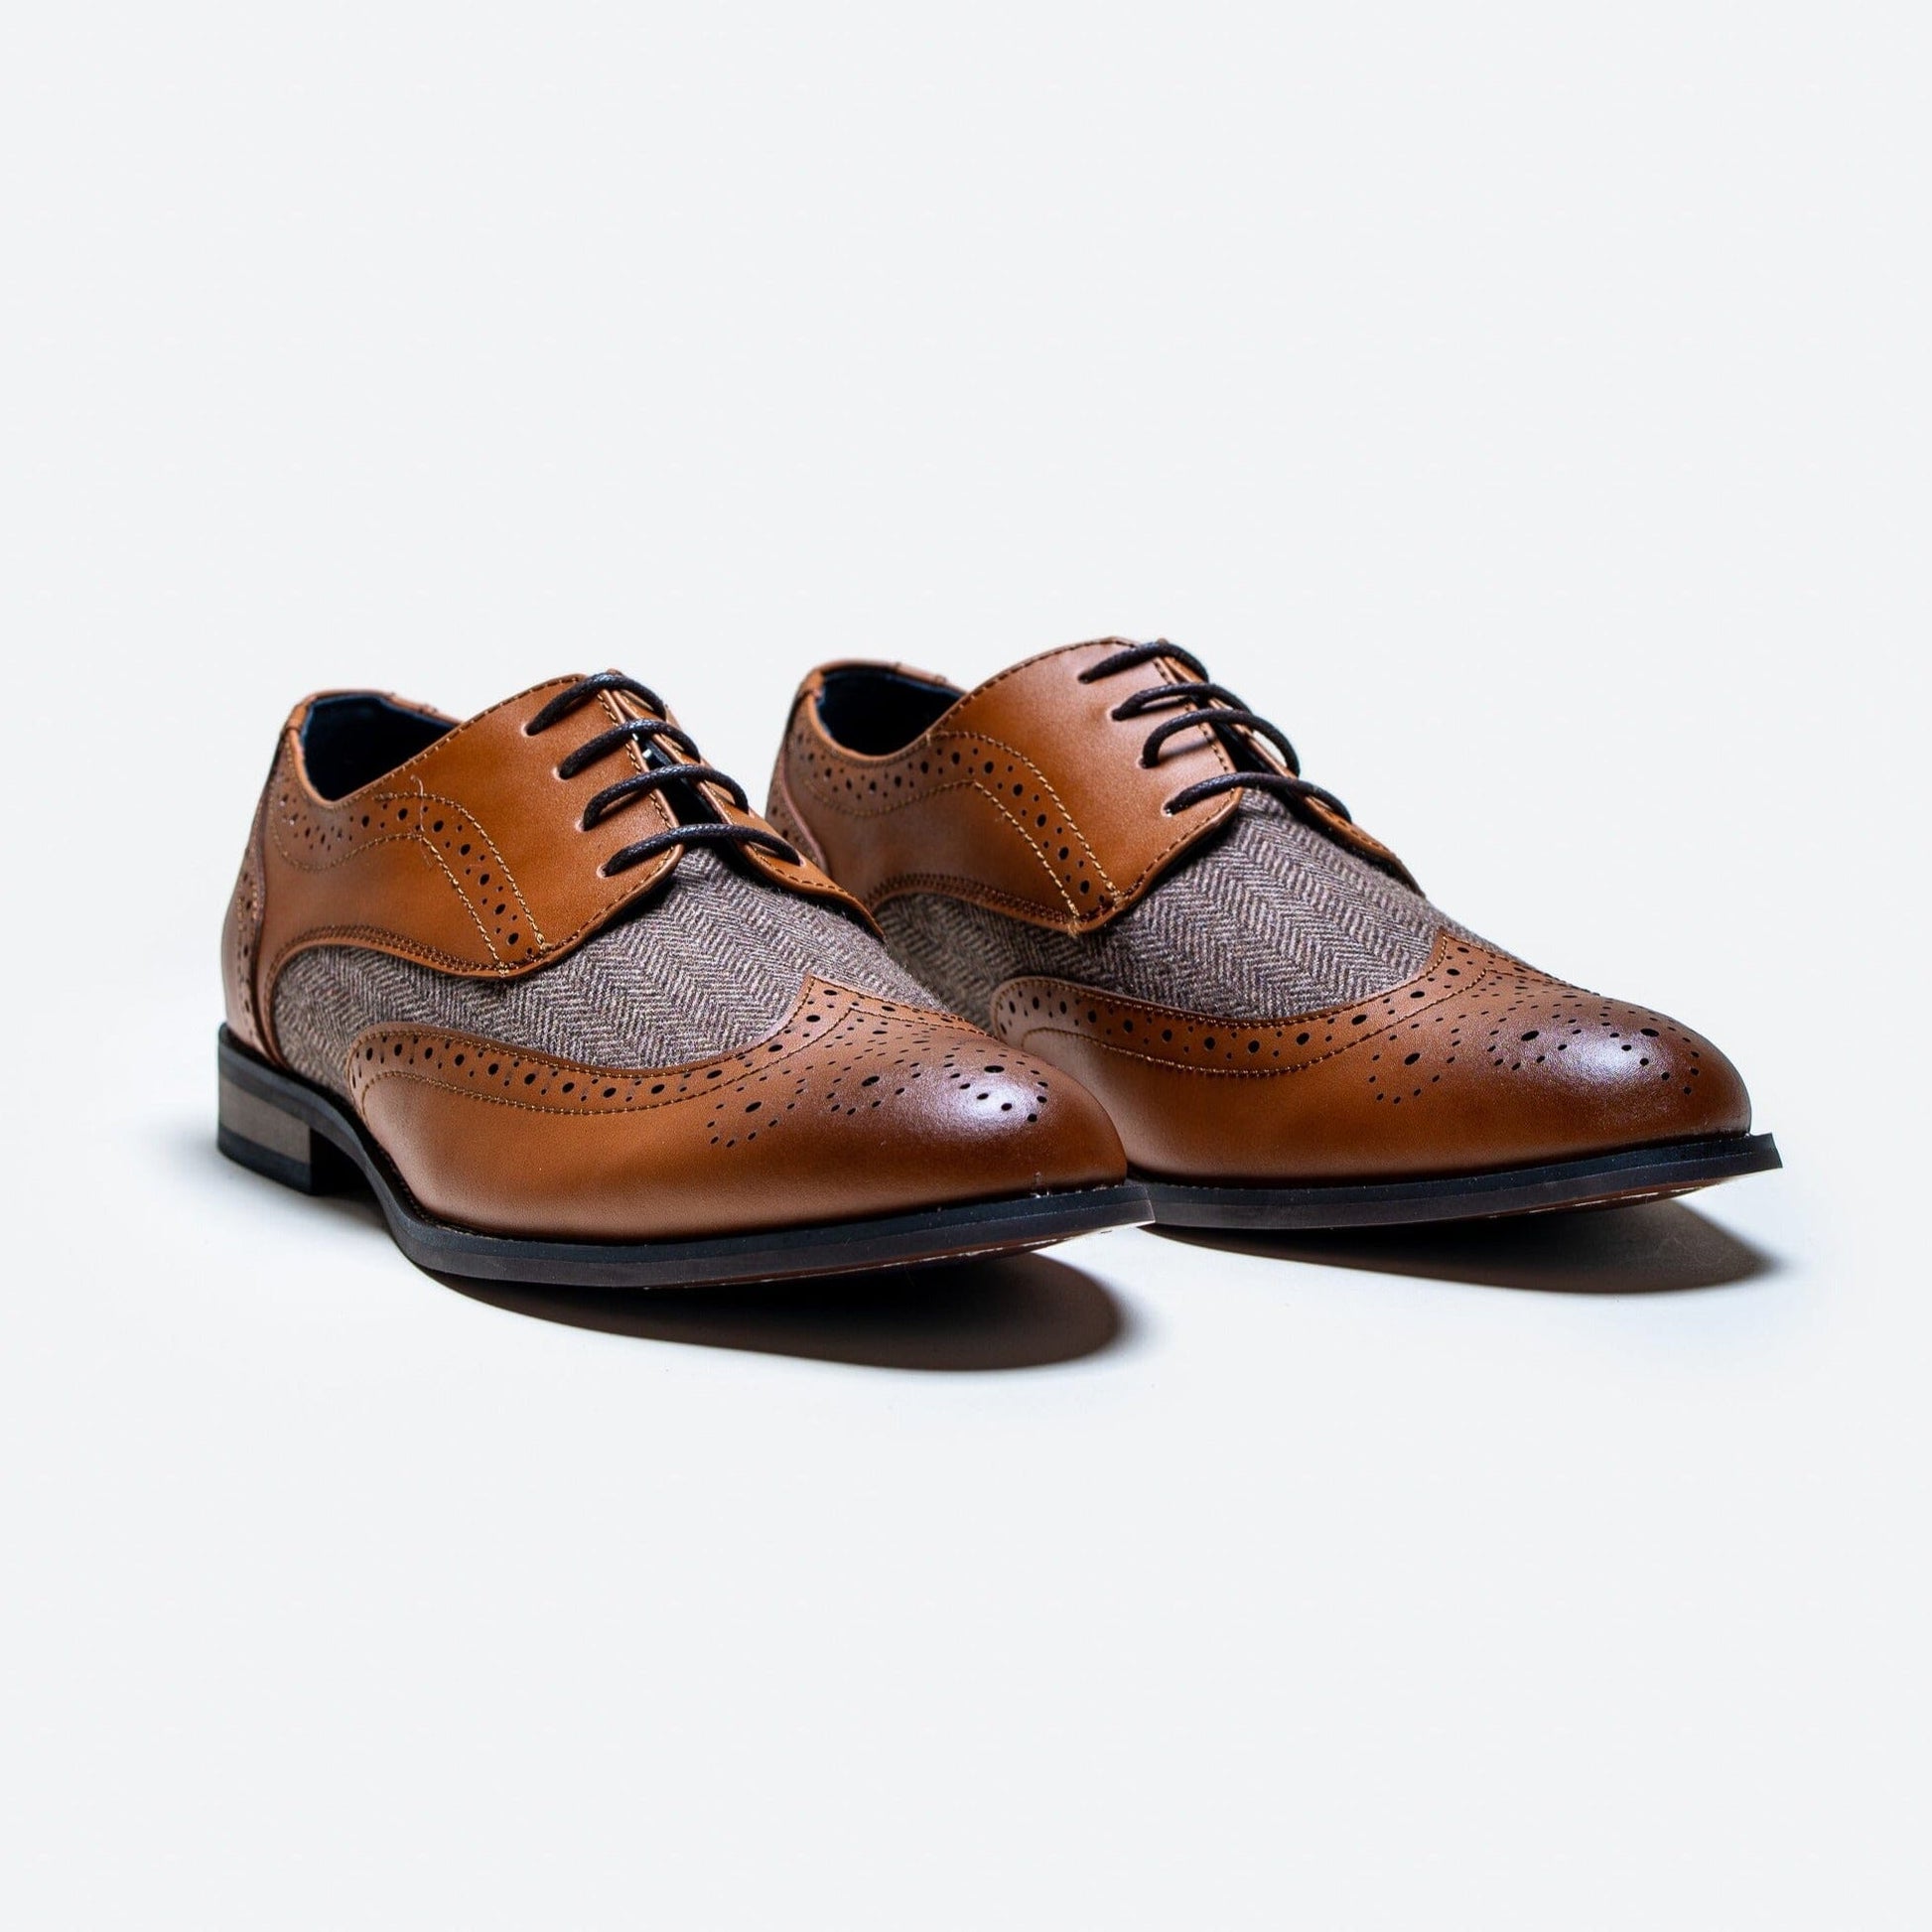 Oliver Tan Tweed Shoes - Shoes - - THREADPEPPER